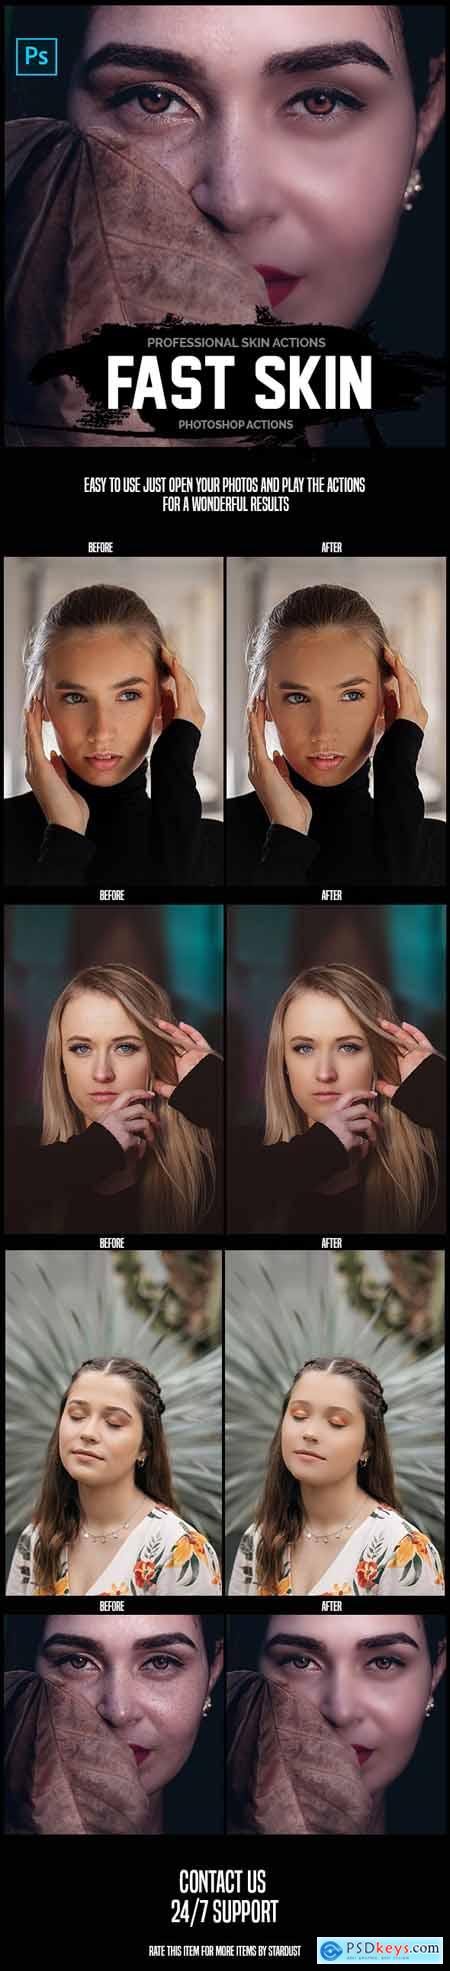 Fast Skin - Professional Photoshop Actions 26154963